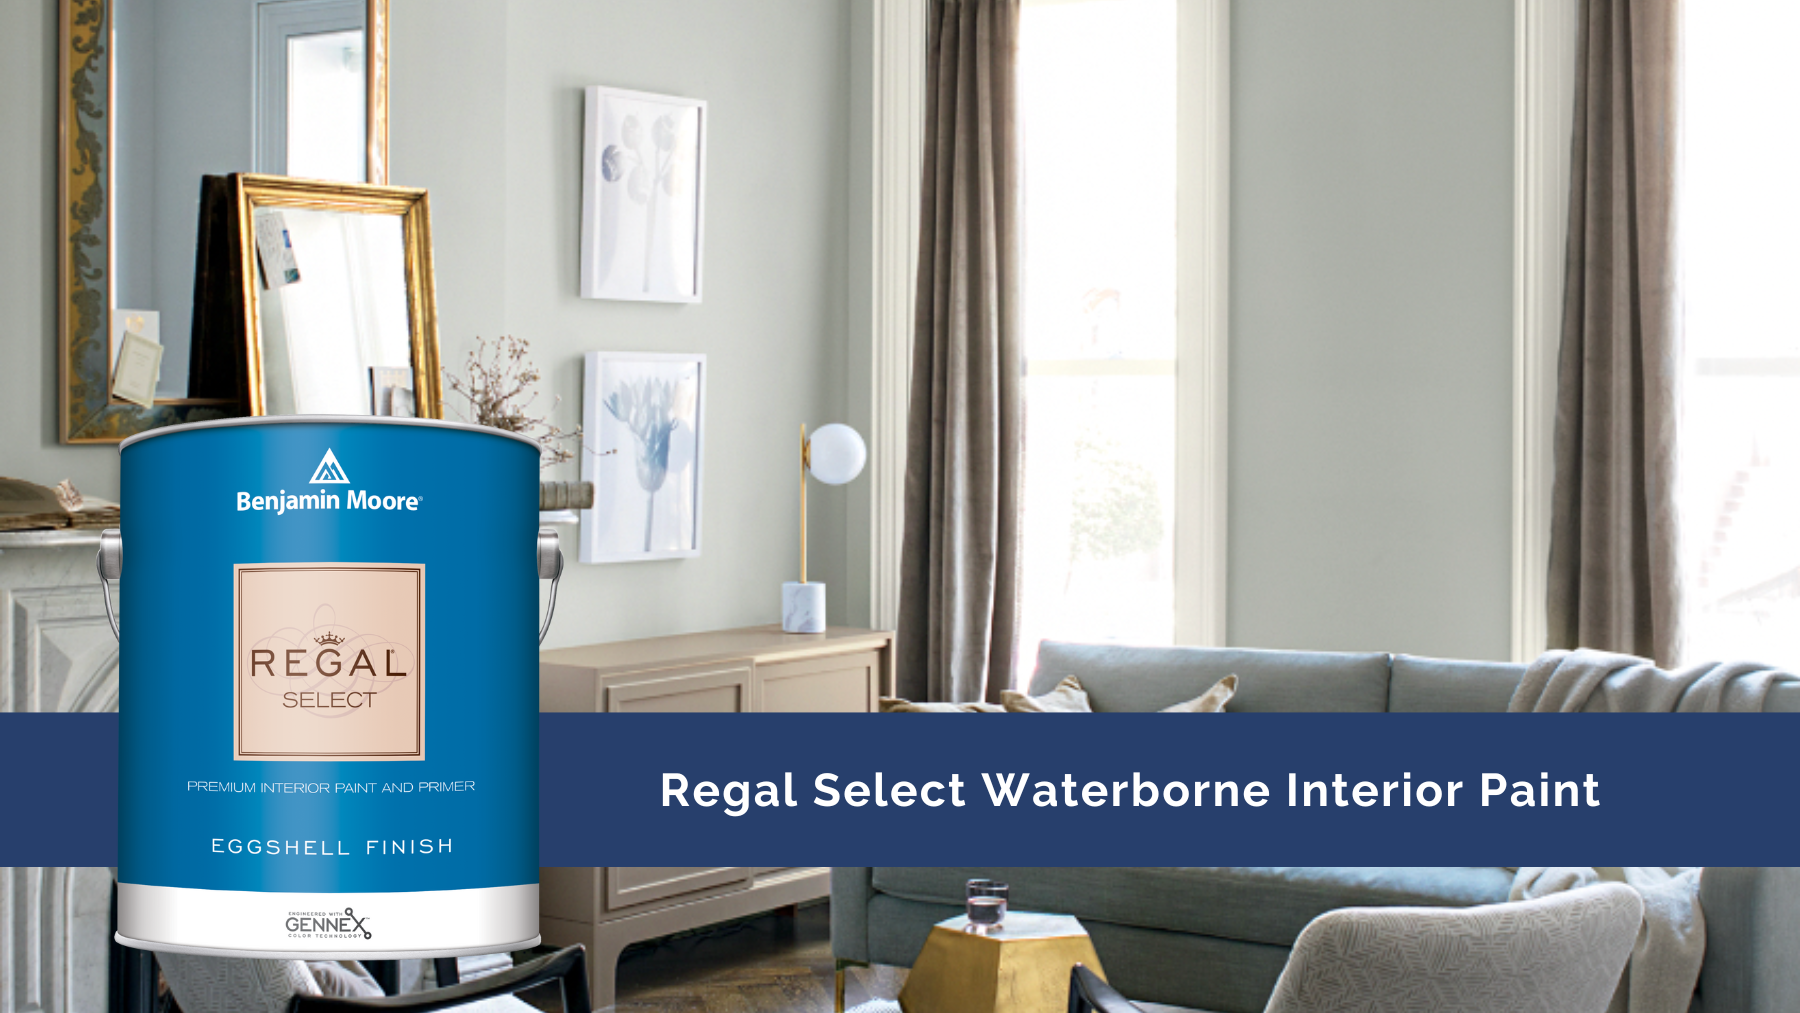 Benjamin Moore Regal Select Interior Paint available at JC Licht.